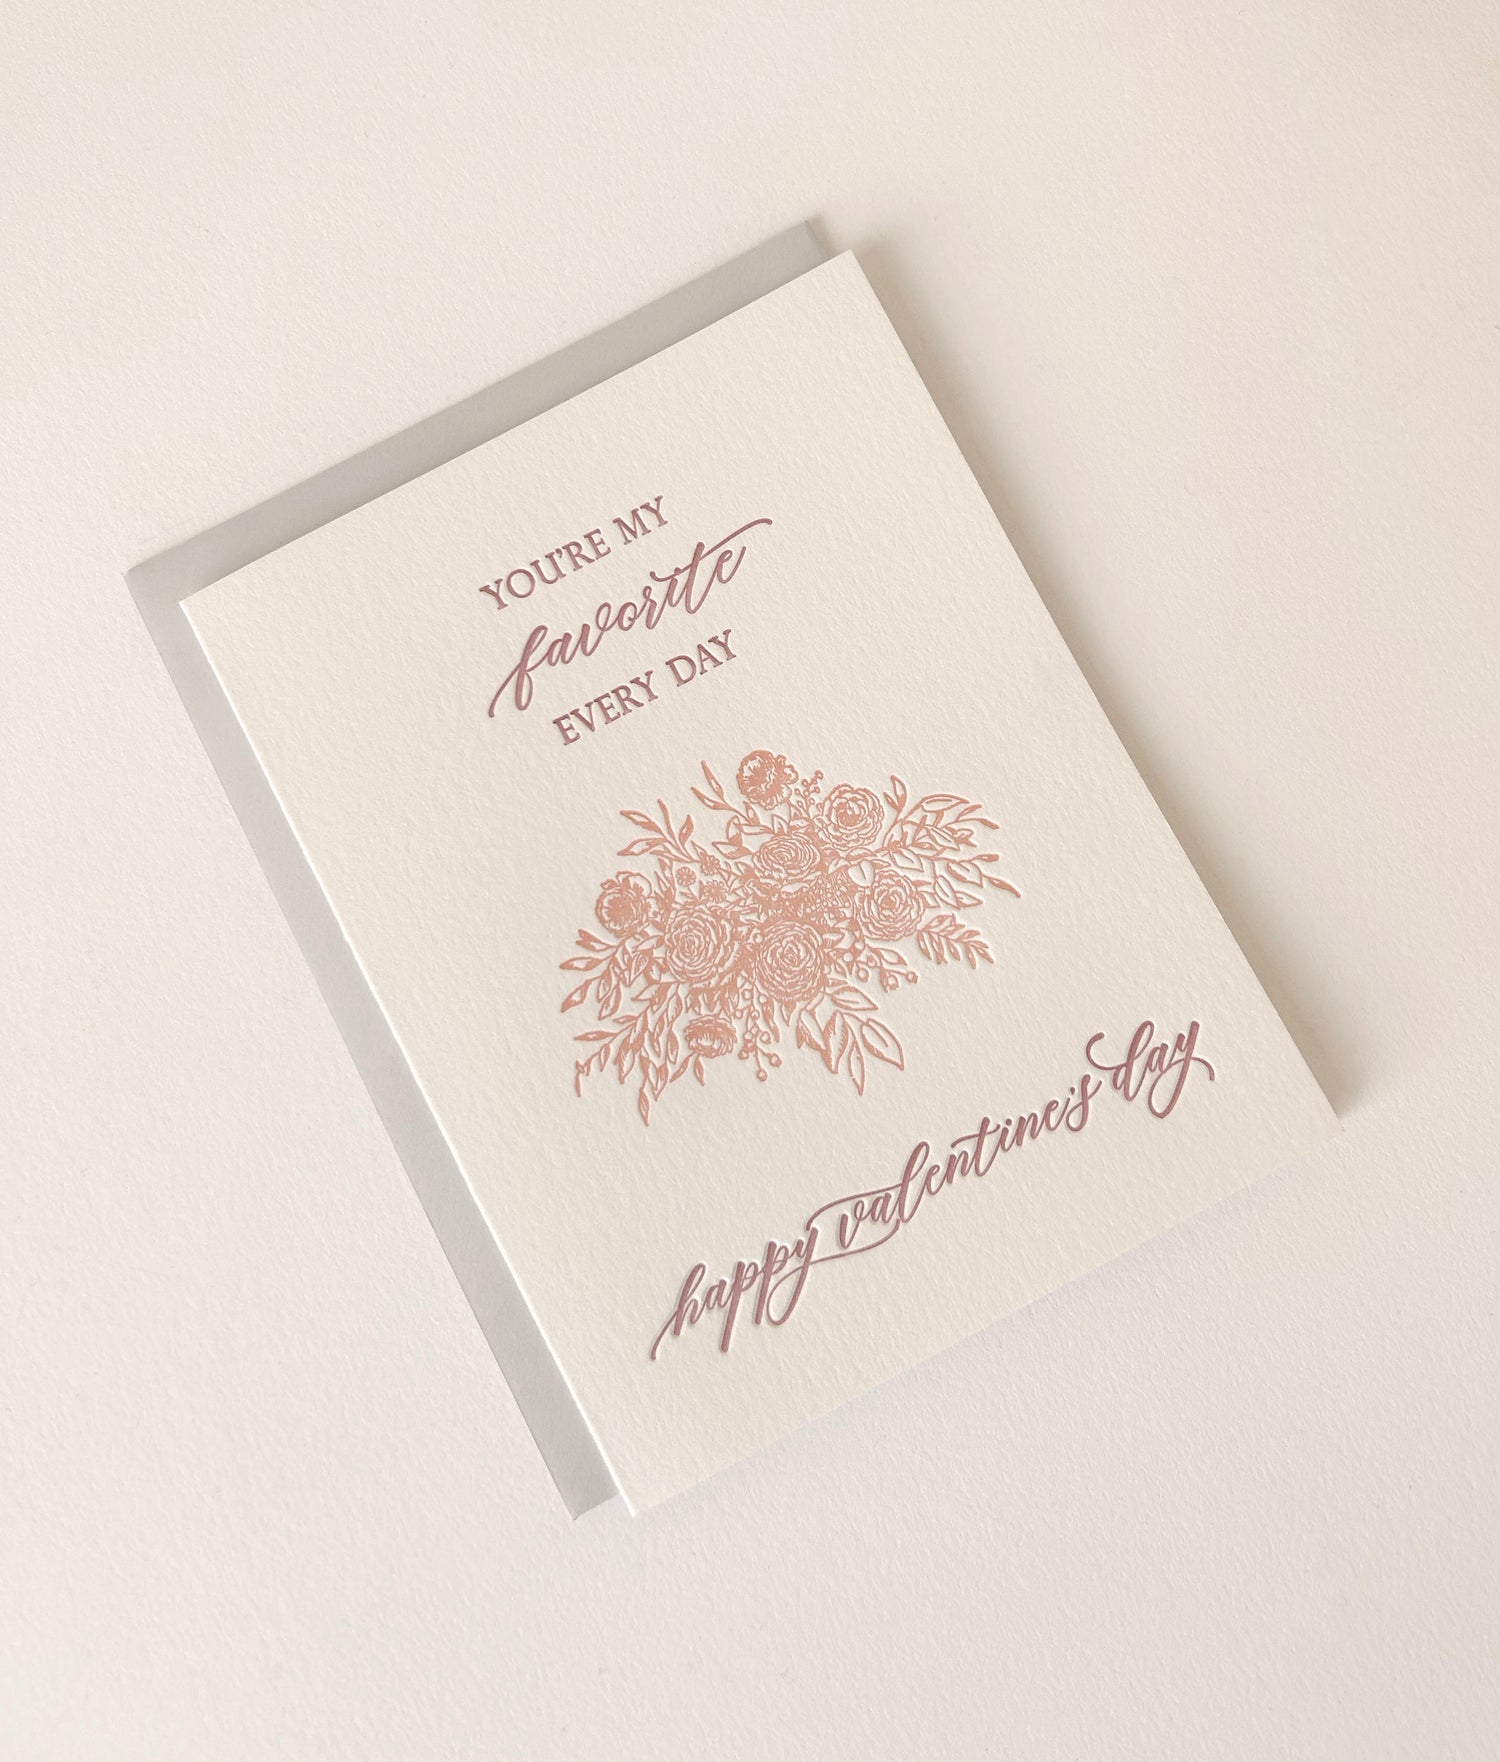 Letterpress valentine card with florals that says "You're My Favorite Every Day Happy Valentine's Day" by Rust Belt Love